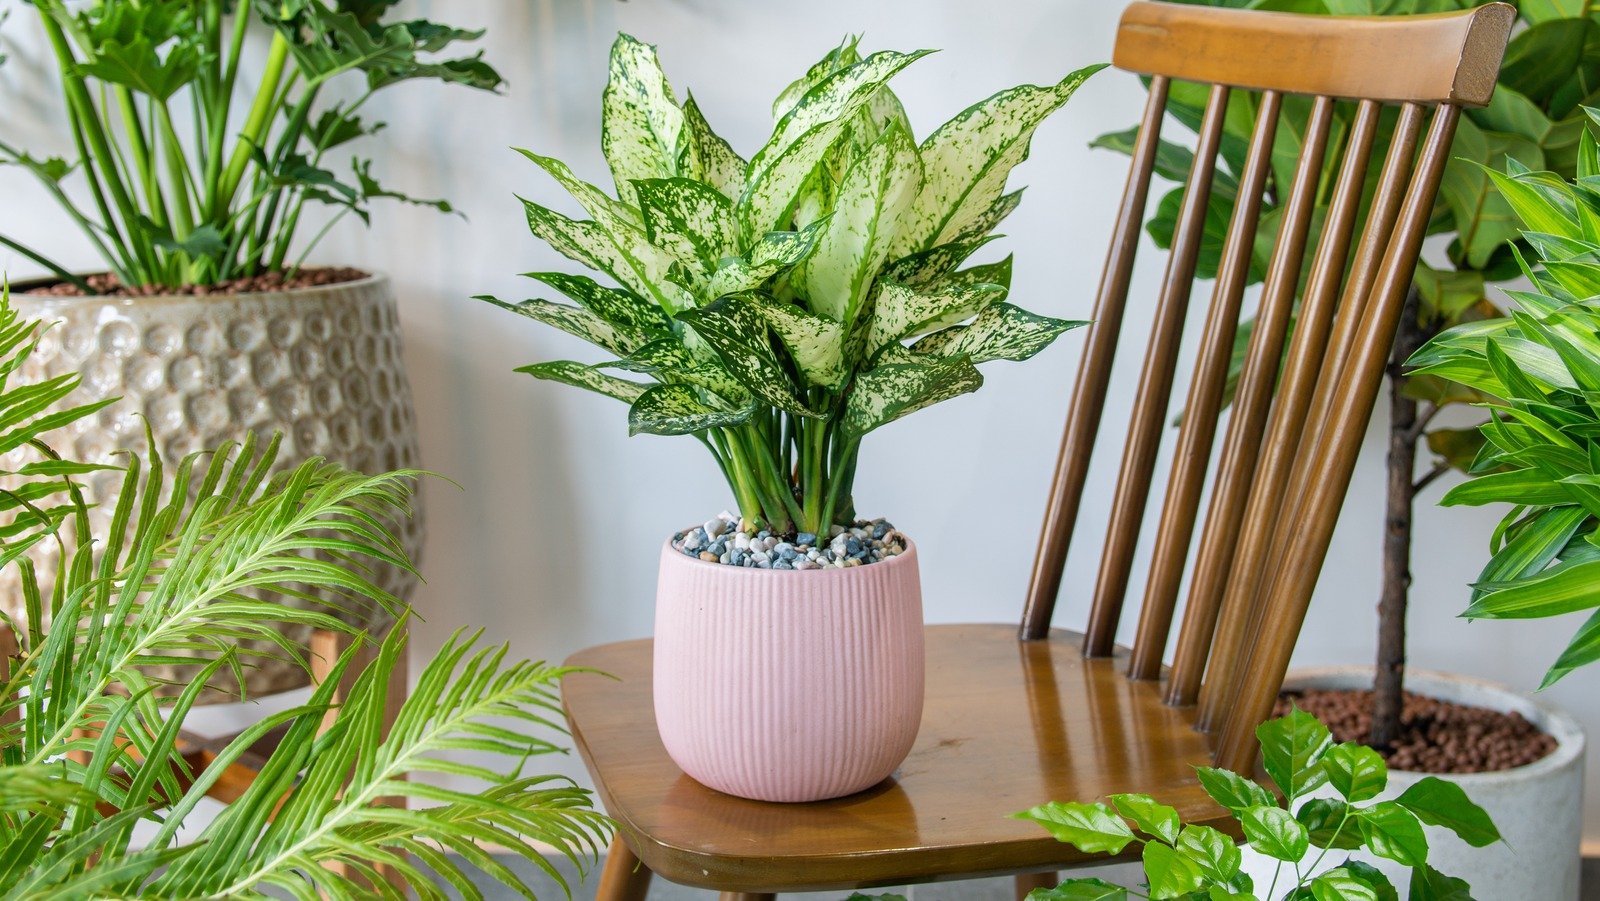 What Does Variegated Mean For Houseplants, And How Can You Incorporate It Into Decor?